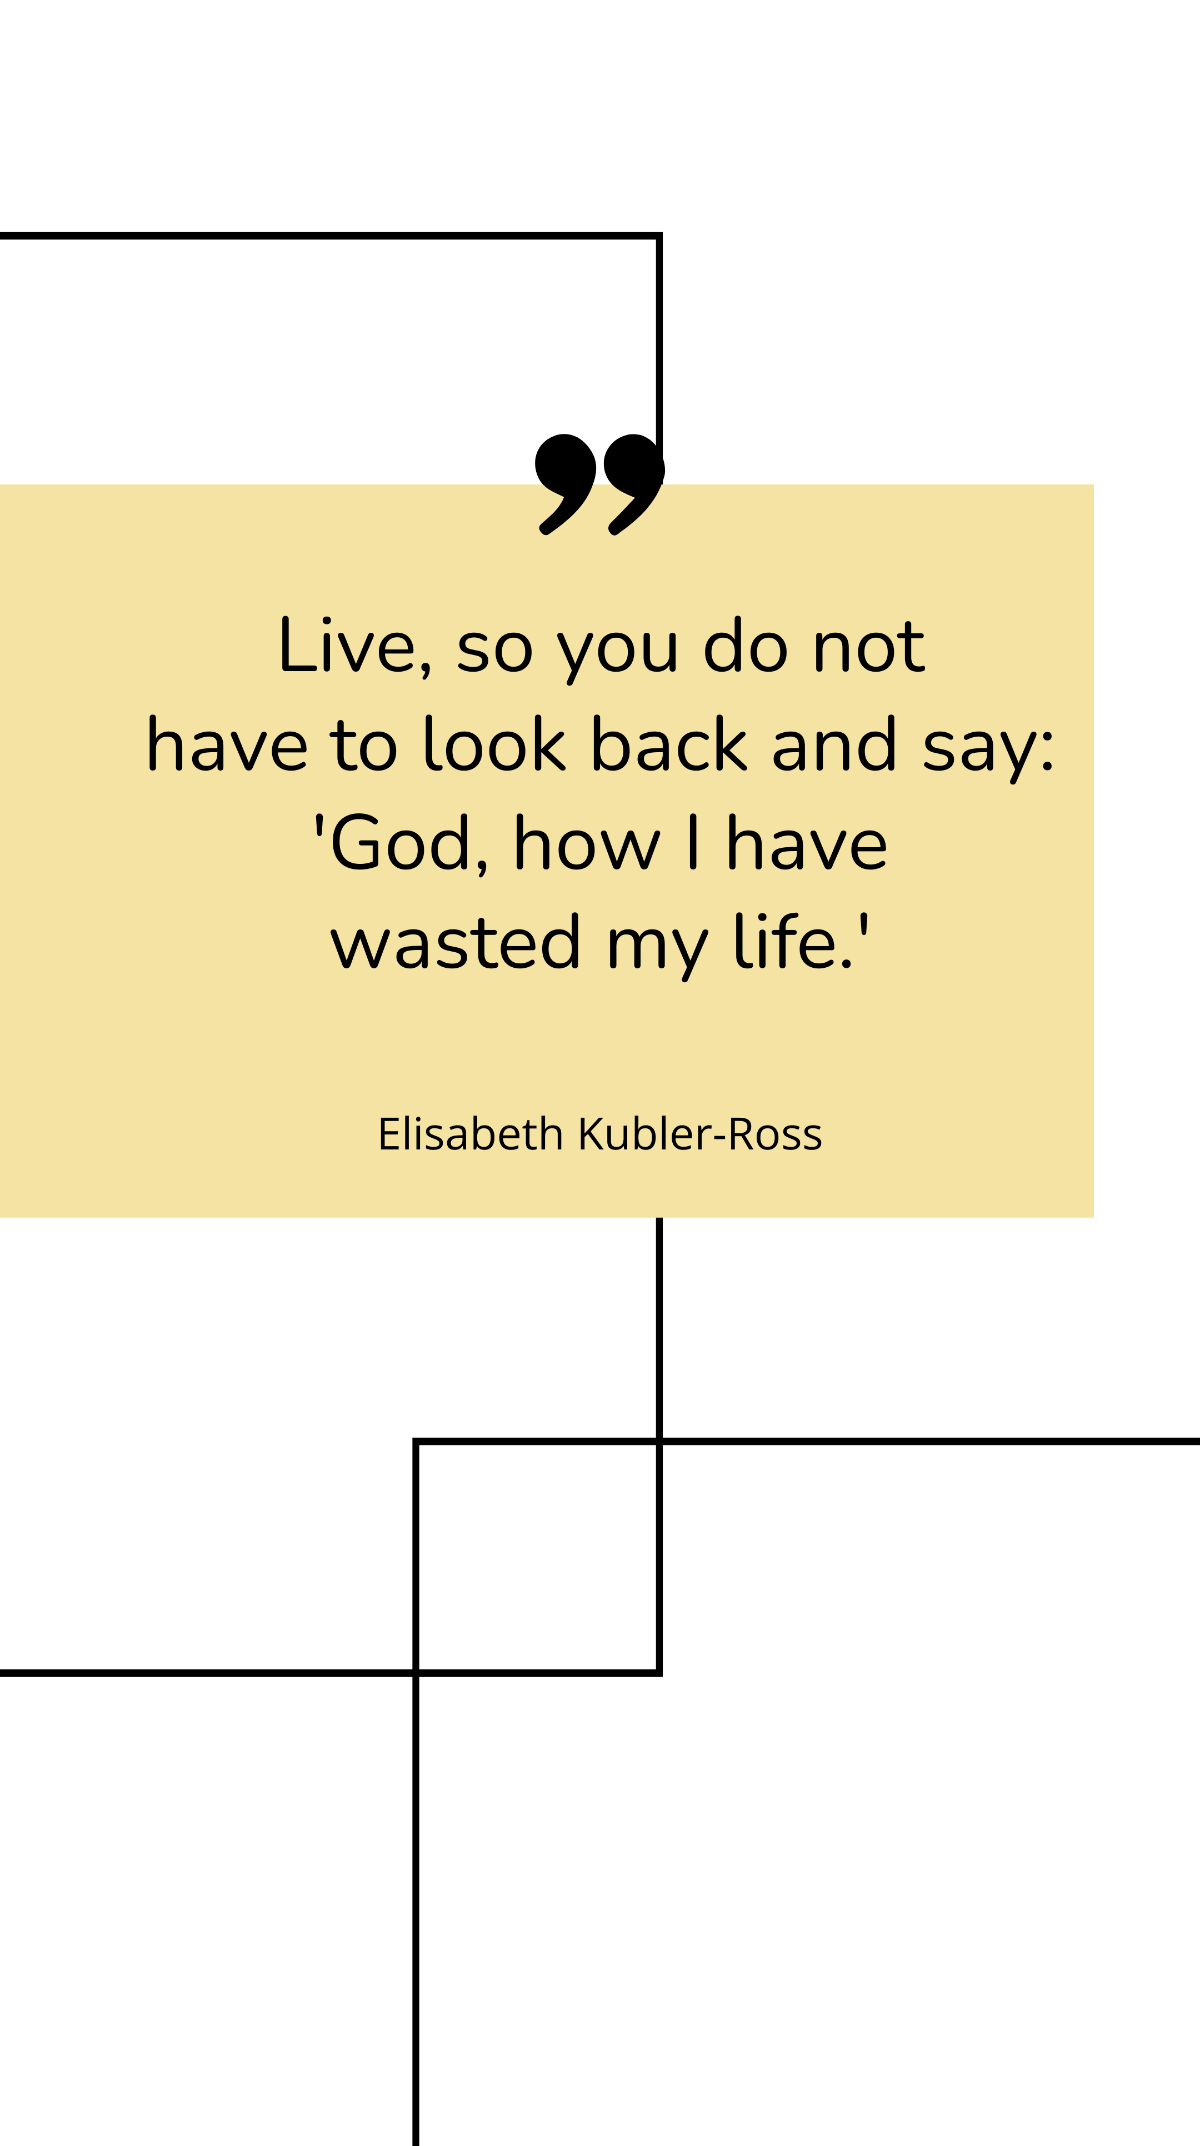 /Elisabeth Kubler-Ross - Live, so you do not have to look back and say: 'God, how I have wasted my life.' Template